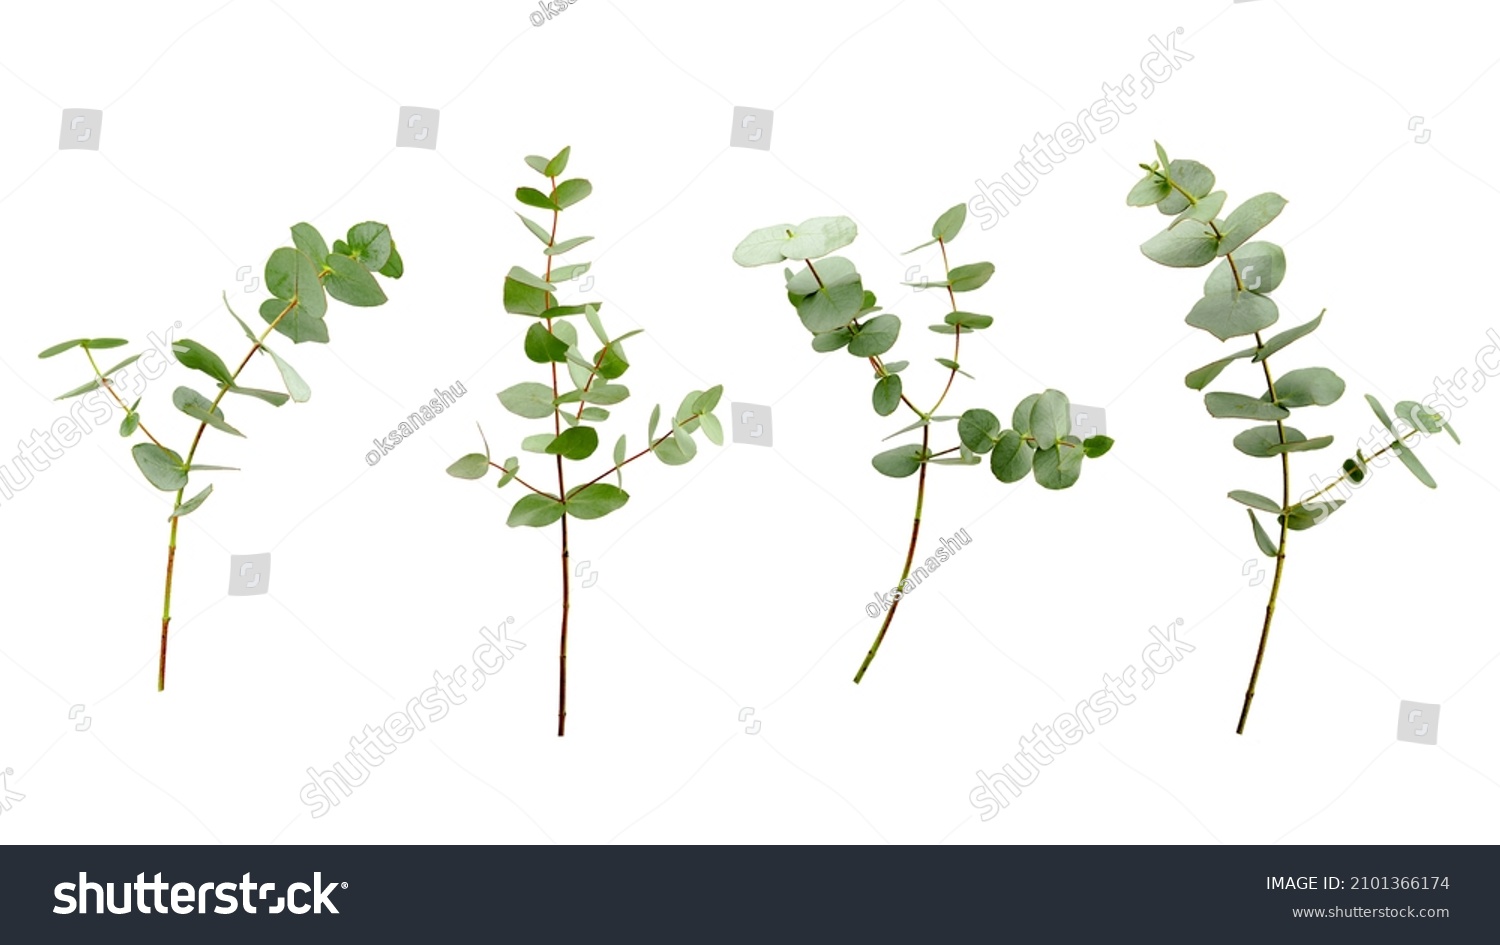 Set of eucalyptus branches with leaves isolated on white background. #2101366174